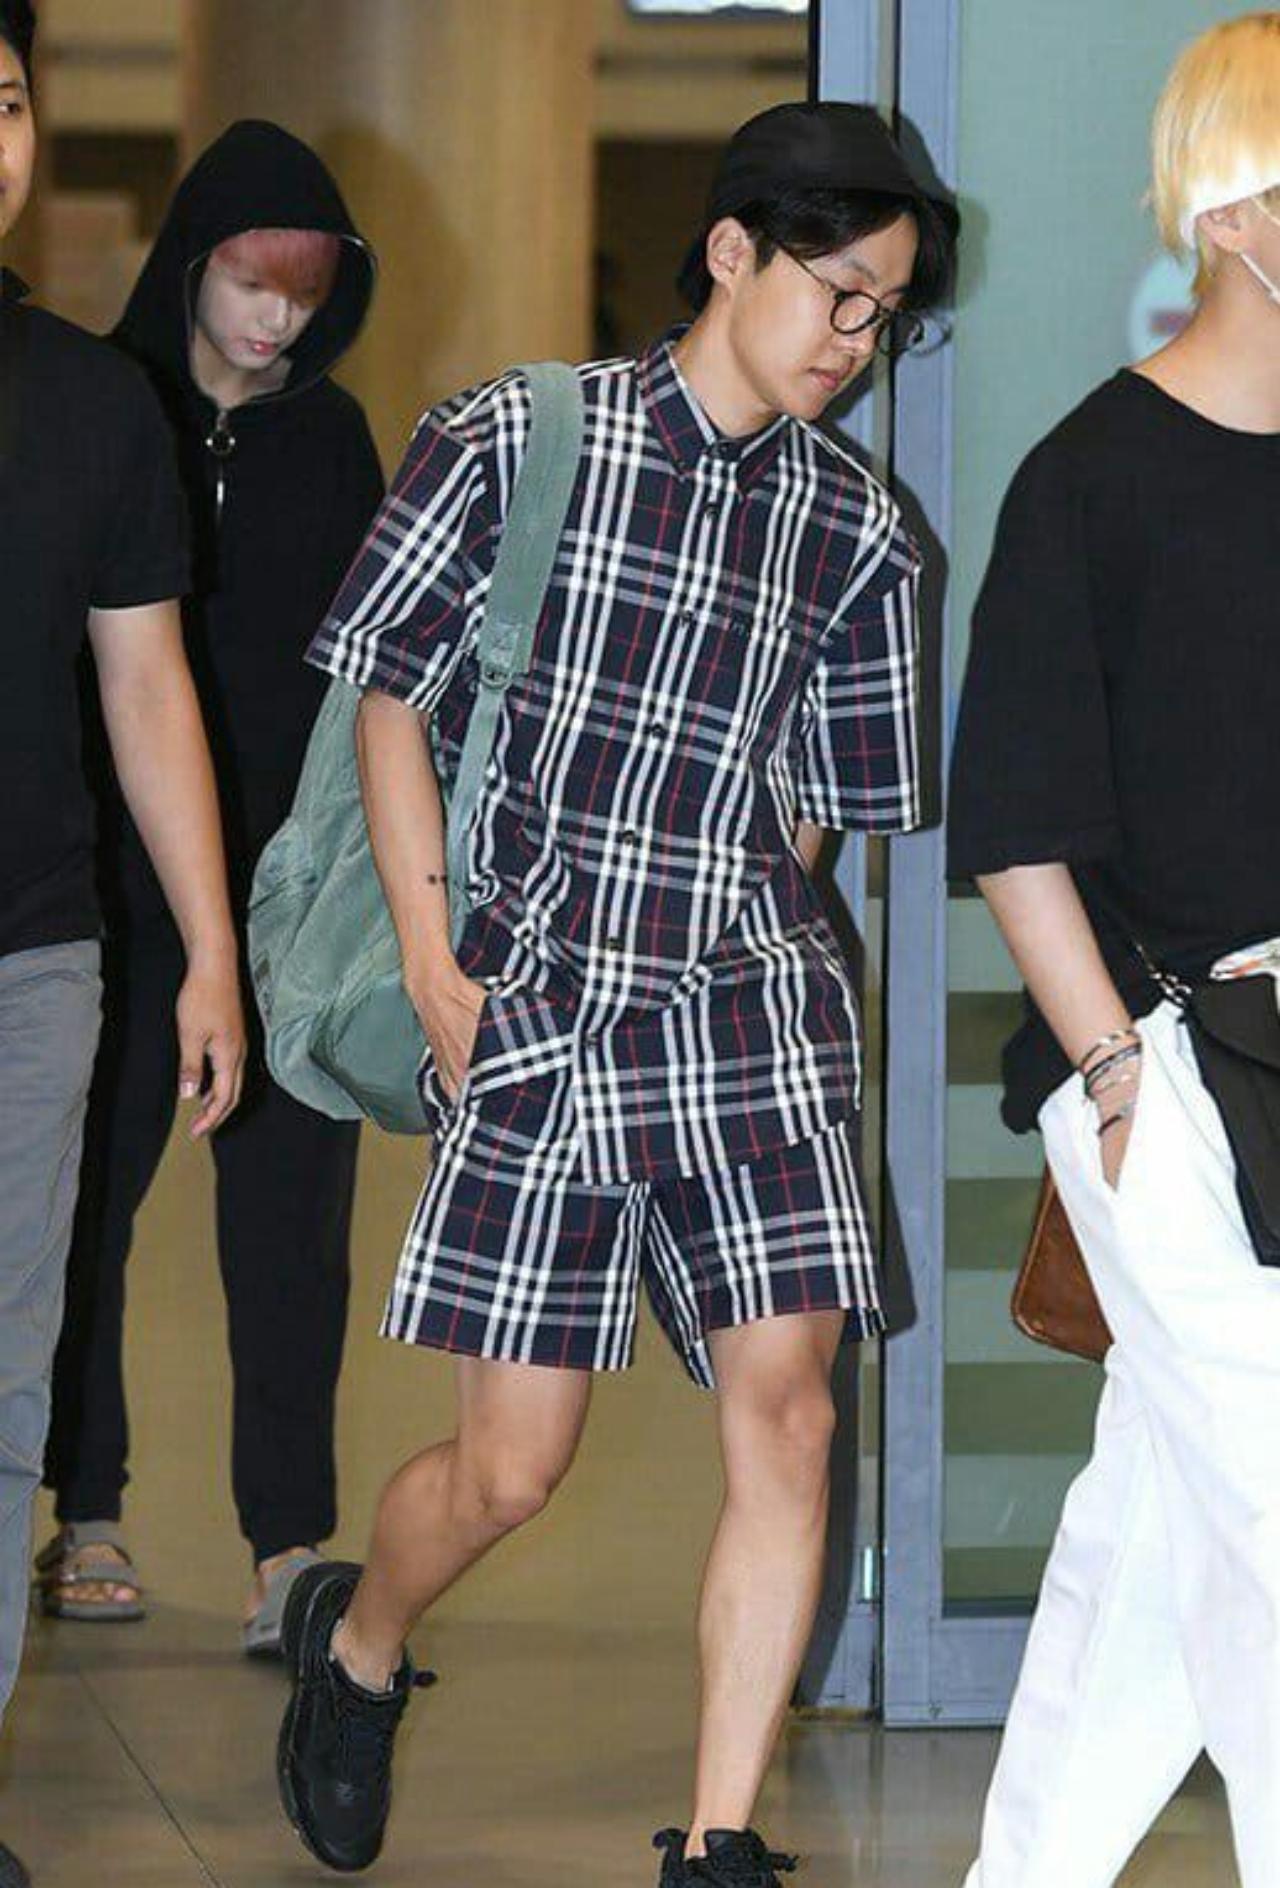 J-Hope is rocking this checkered co-ord set - an outfit he wore during BTS's vacation to Malta on their reality travel show - 'Bon Voyage.' Meanwhile, Jungkook in the background has put on his classic black hoodie and pants. Take a look at his style file here 